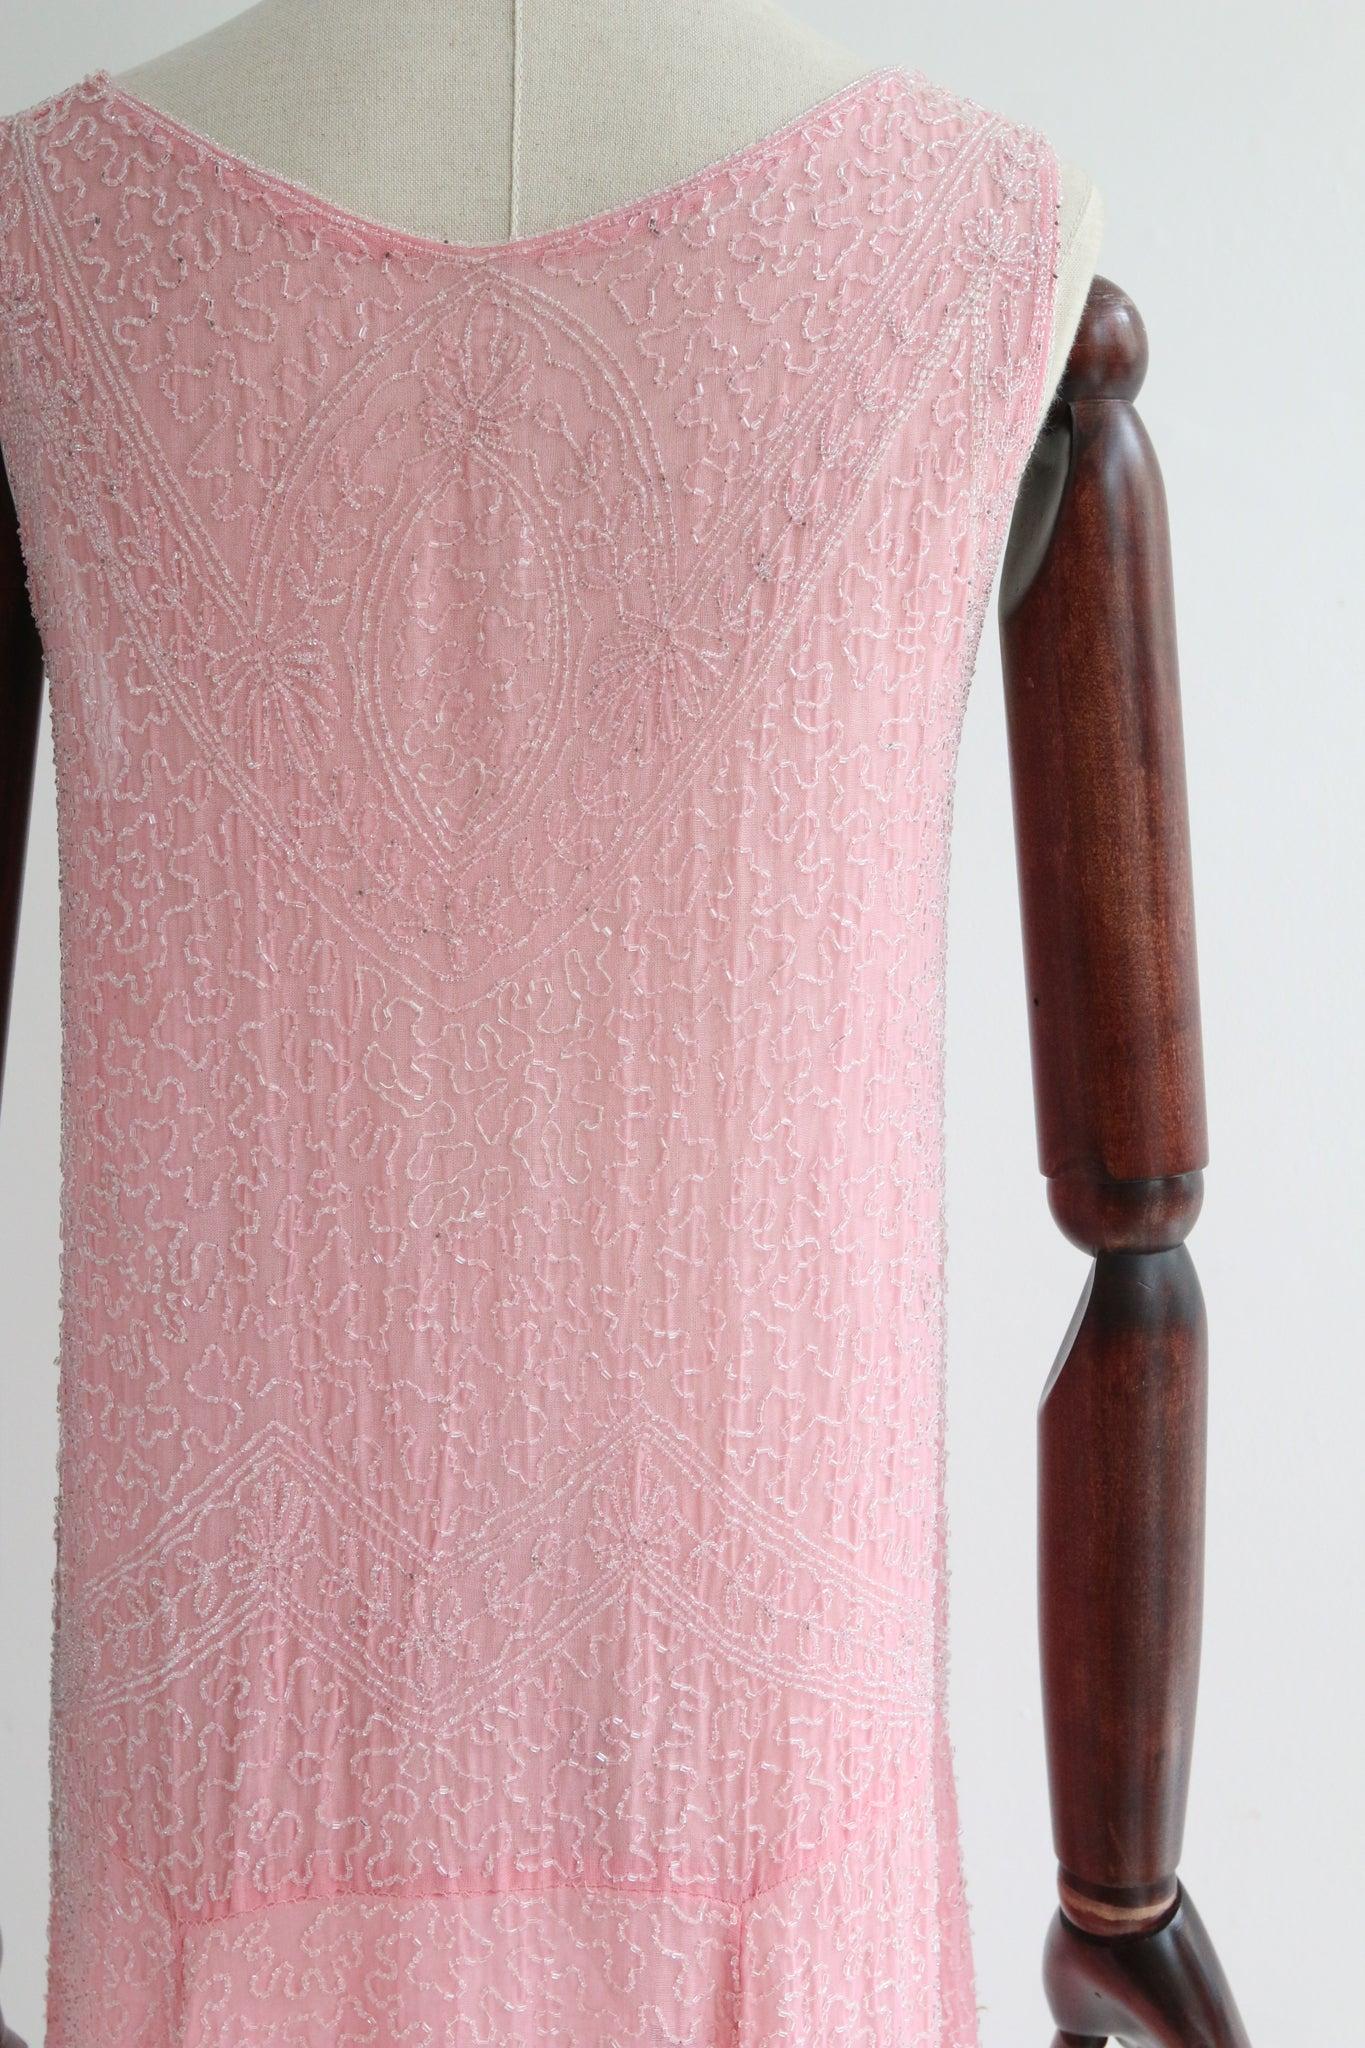 Vintage 1920's Beaded Dress Pink Cotton Voile Glass Beaded Fringed Dress UK 8-10 For Sale 5